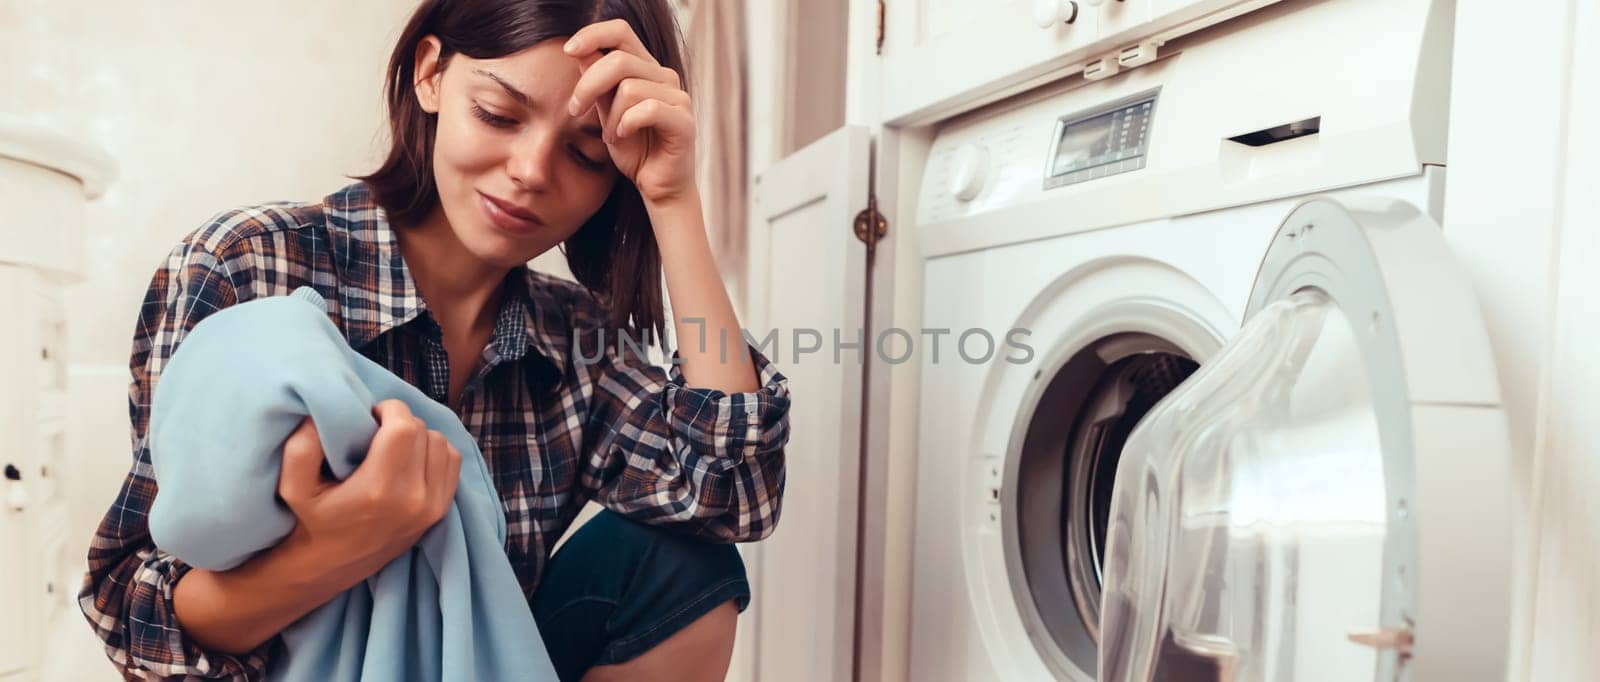 A young girl puts things in the washing machine, a tired woman sits on the floor of a cozy house and looks at the stain on her jacket, which needs to be removed with detergent.